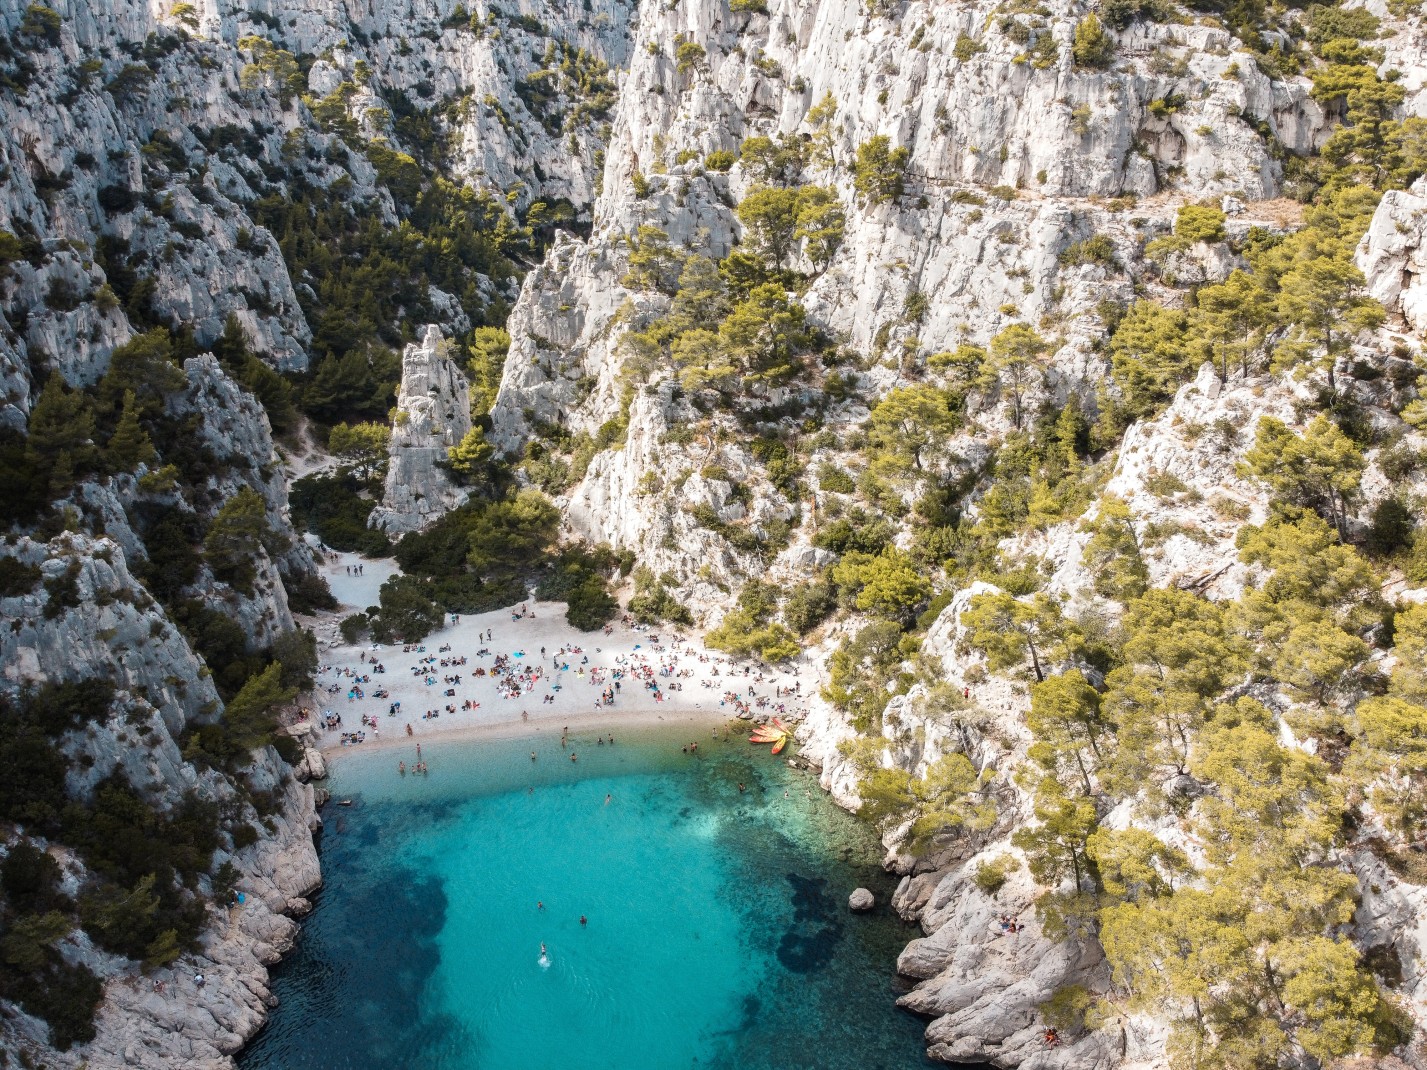 Calanque cove with blue water and white sand beaches in the South of France. 